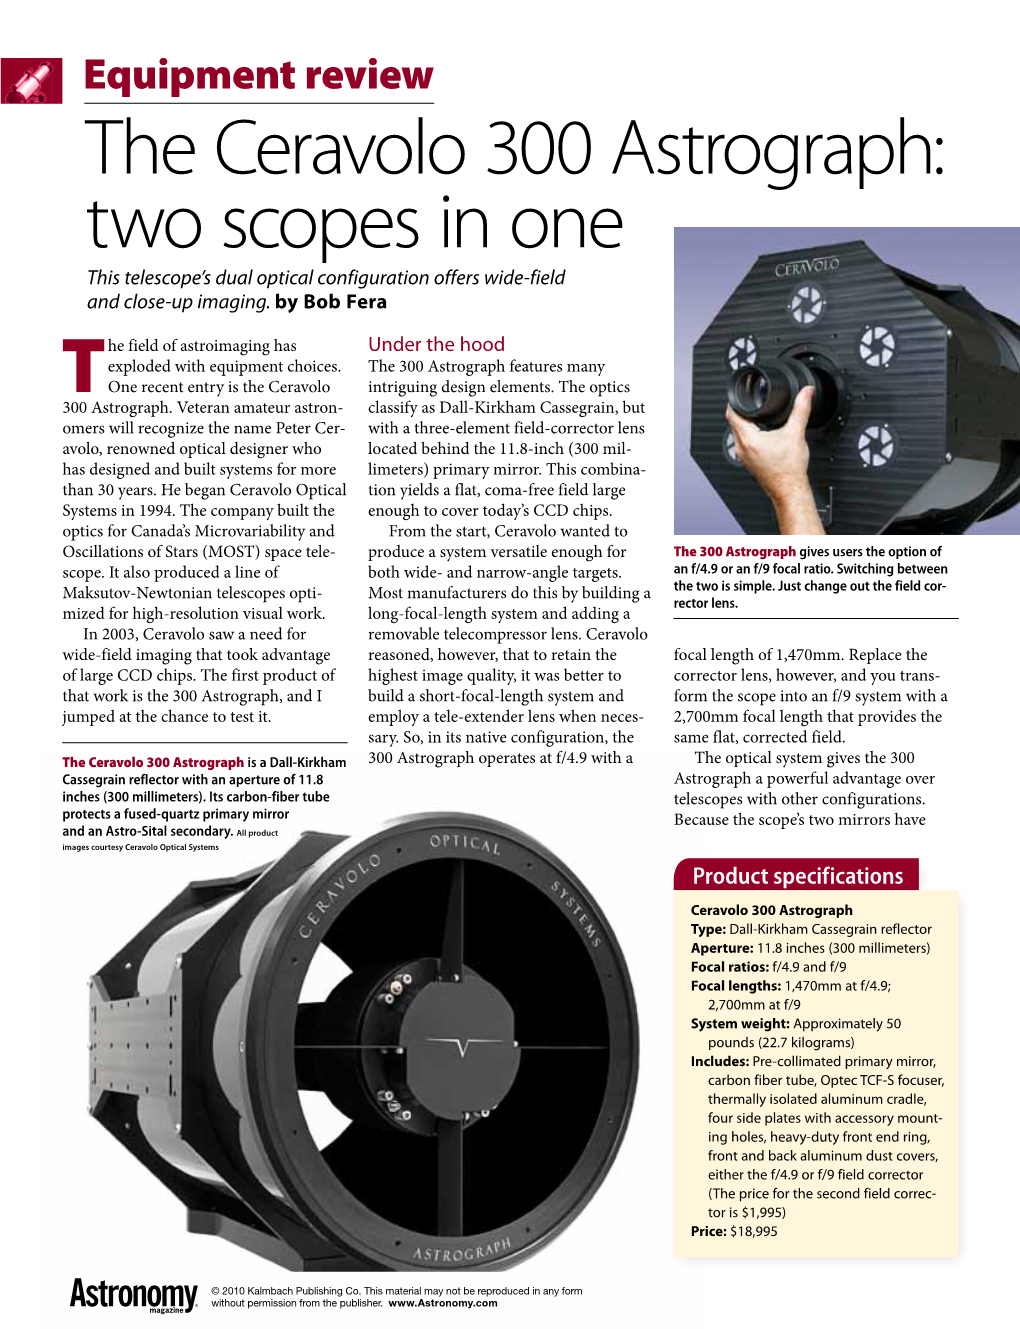 The Ceravolo 300 Astrograph: Two Scopes in One This Telescope’S Dual Optical Configuration Offers Wide-Field and Close-Up Imaging